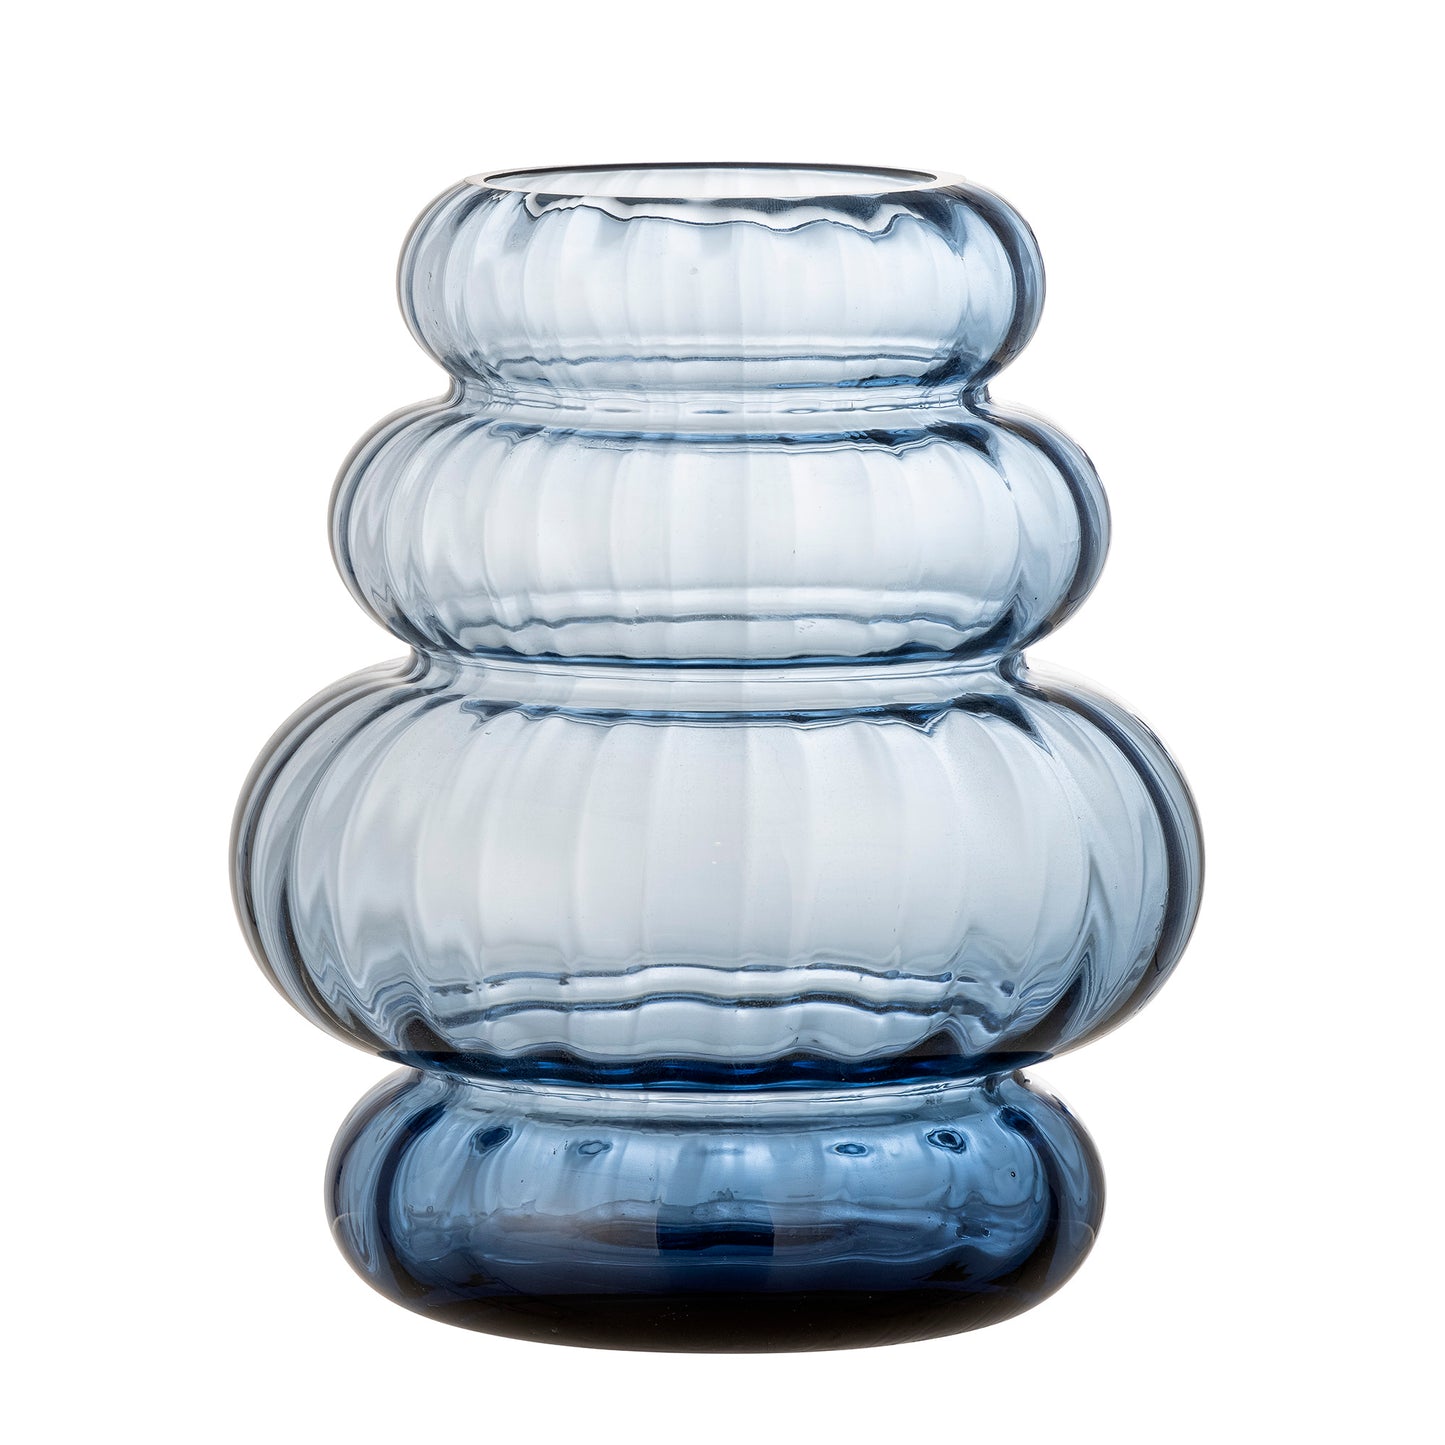 The Every Space curvy Bing Vase in blue spray coloured glass for flowers or decoration, by Bloomingville